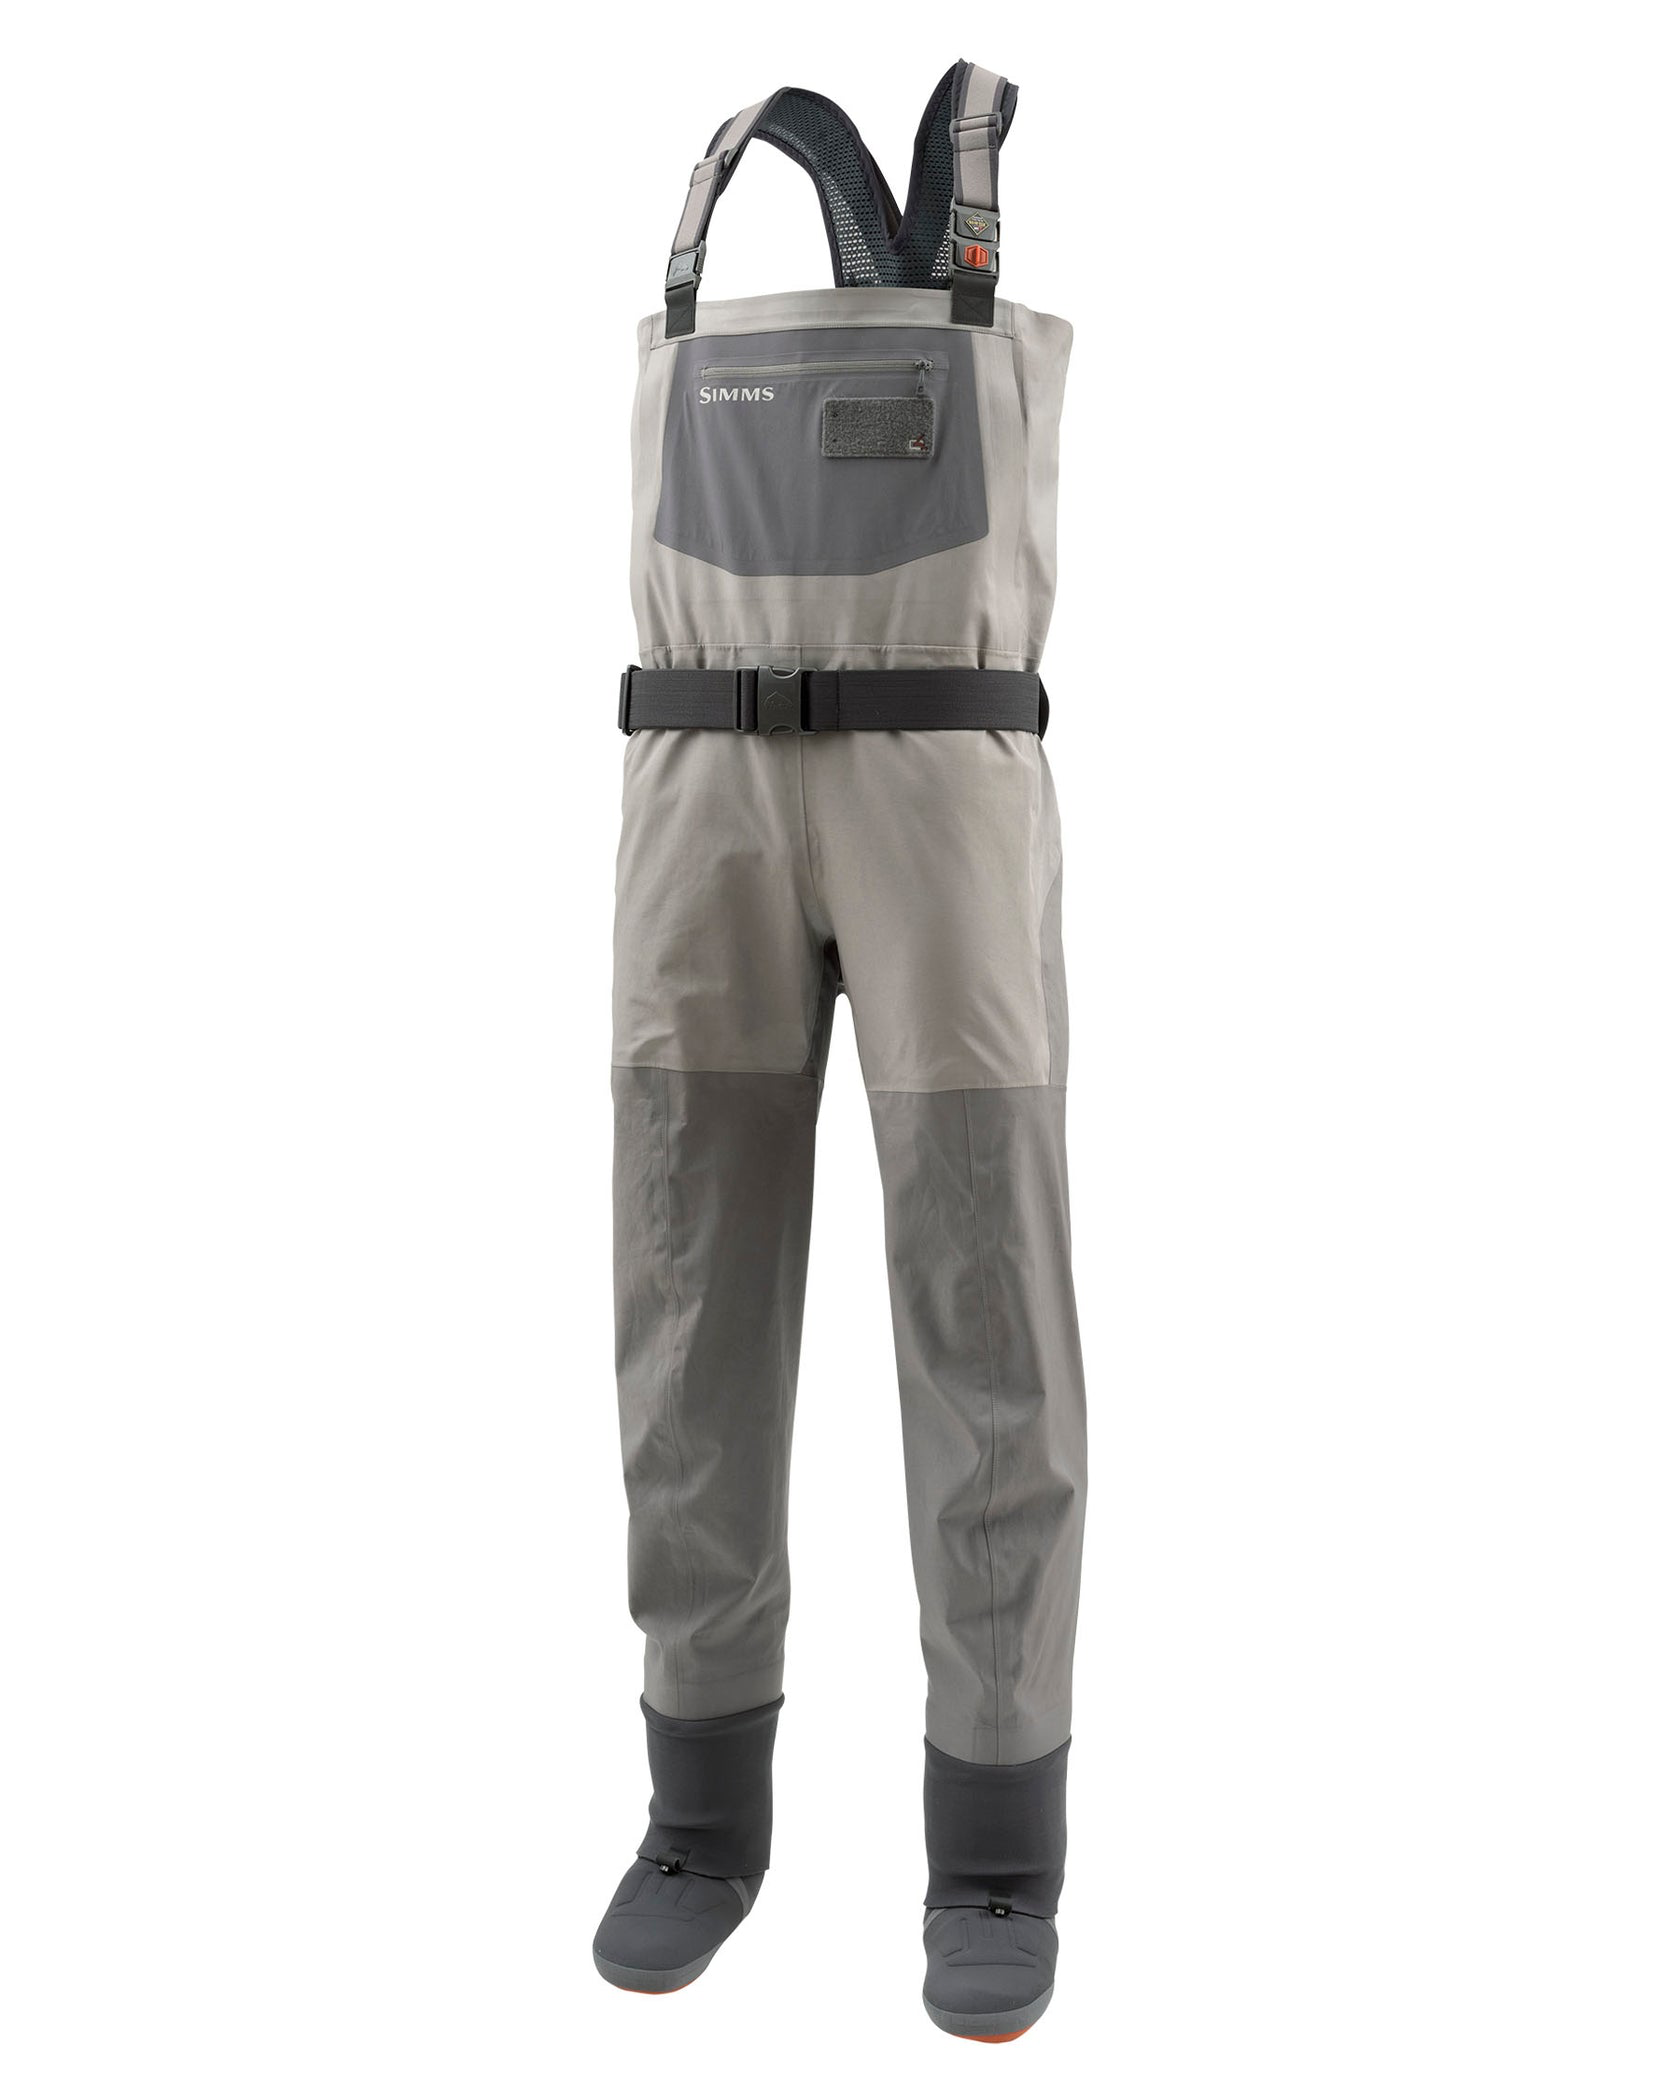 Simms Fishing Men's G4 Pro Wader - CLEARANCE